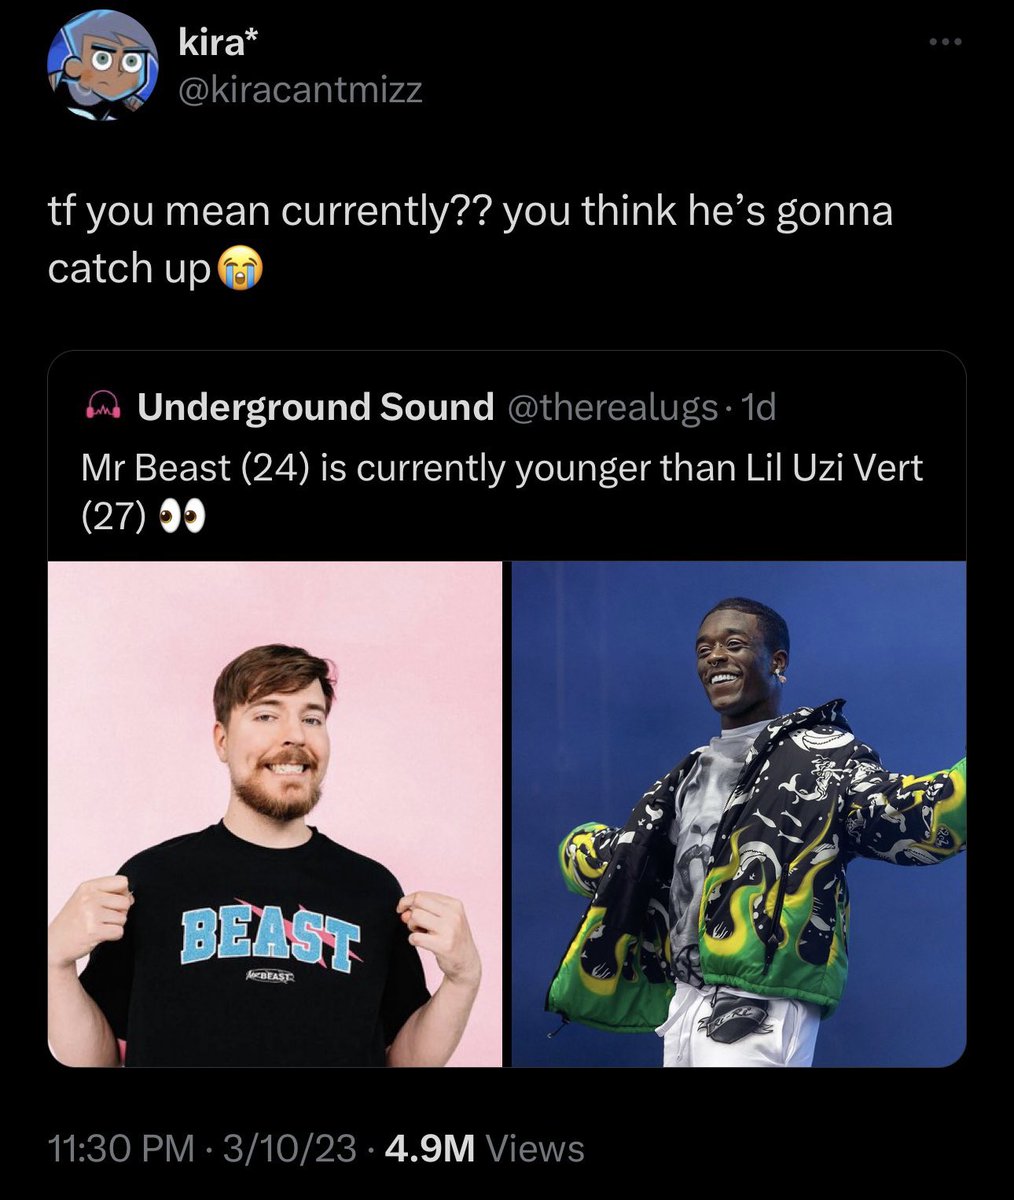 t shirt - kira tf you mean currently?? you think he's gonna catch up Underground Sound . 1d Mr Beast 24 is currently younger than Lil Uzi Vert 27 Beast 31023 4.9M Views